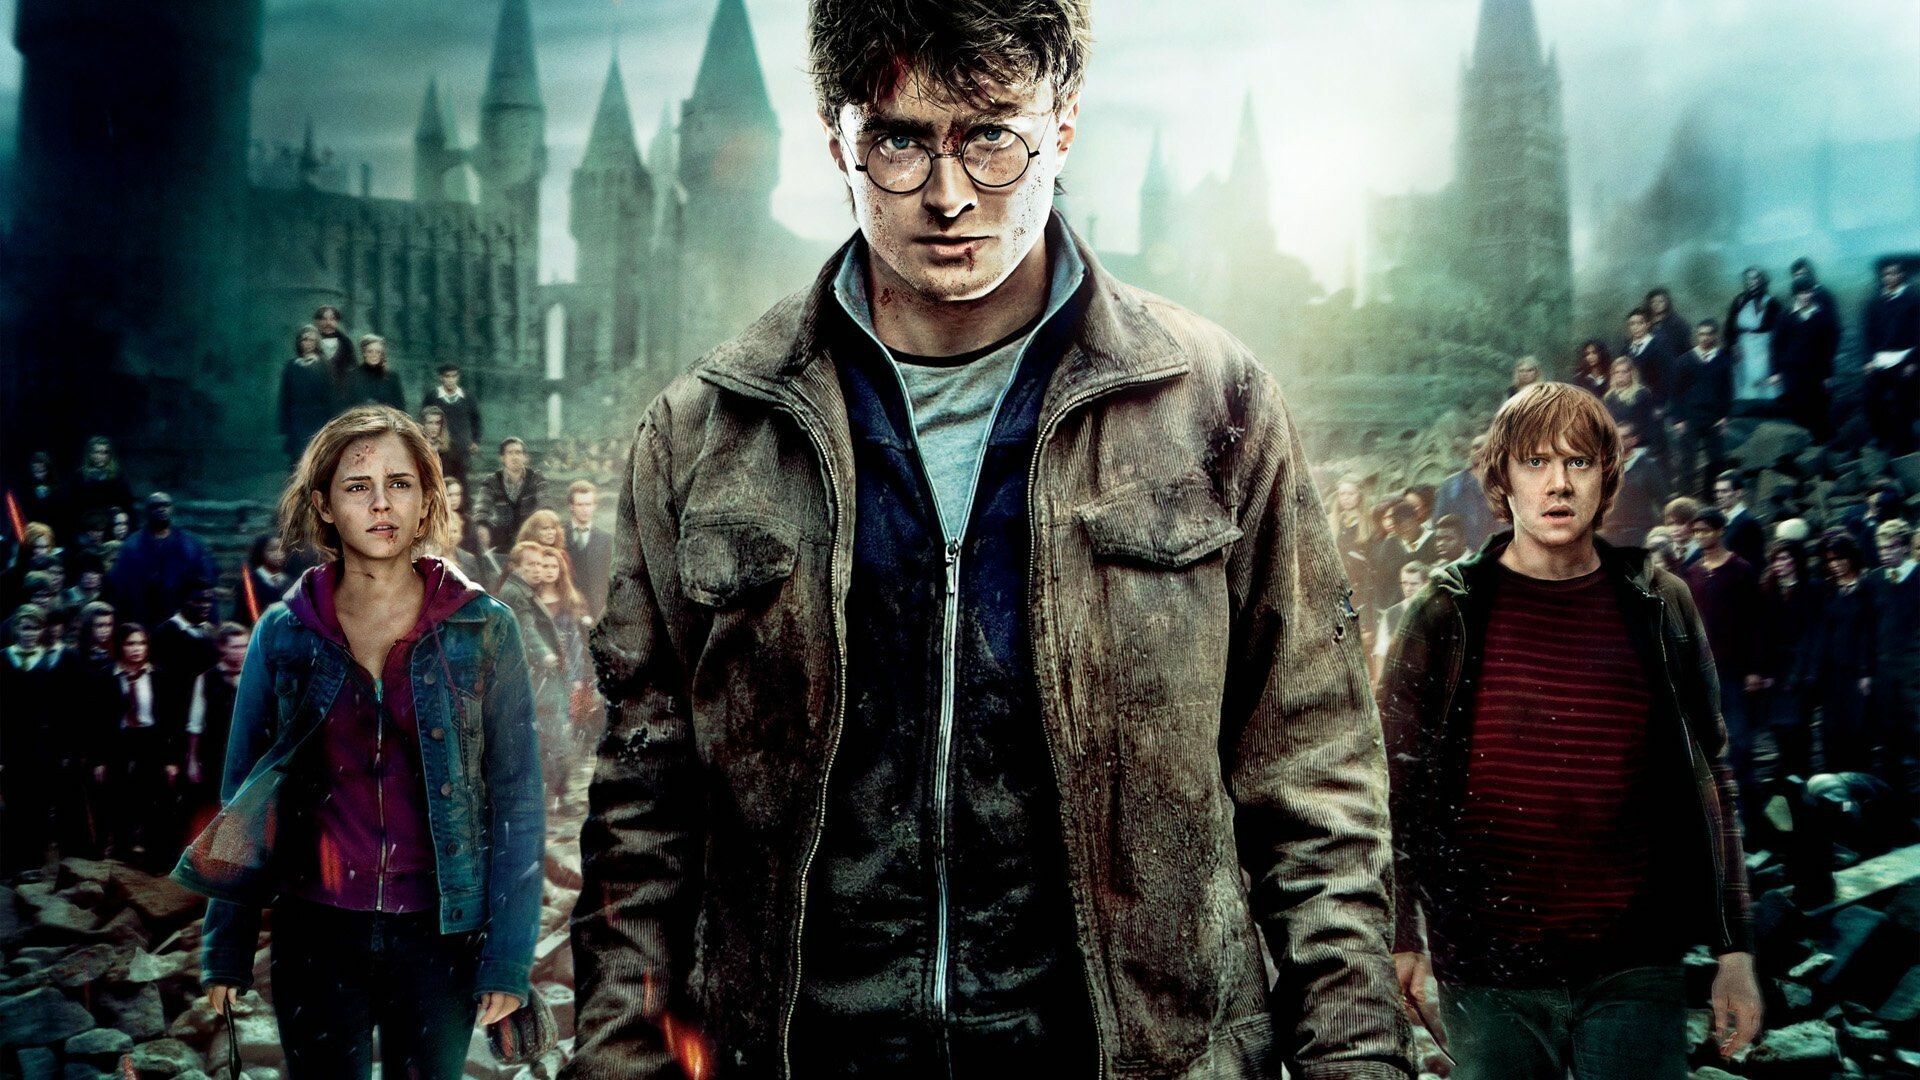 Harry Potter: The Deathly Hallows, Part 2, A 2011 fantasy film directed by David Yates. 1920x1080 Full HD Background.